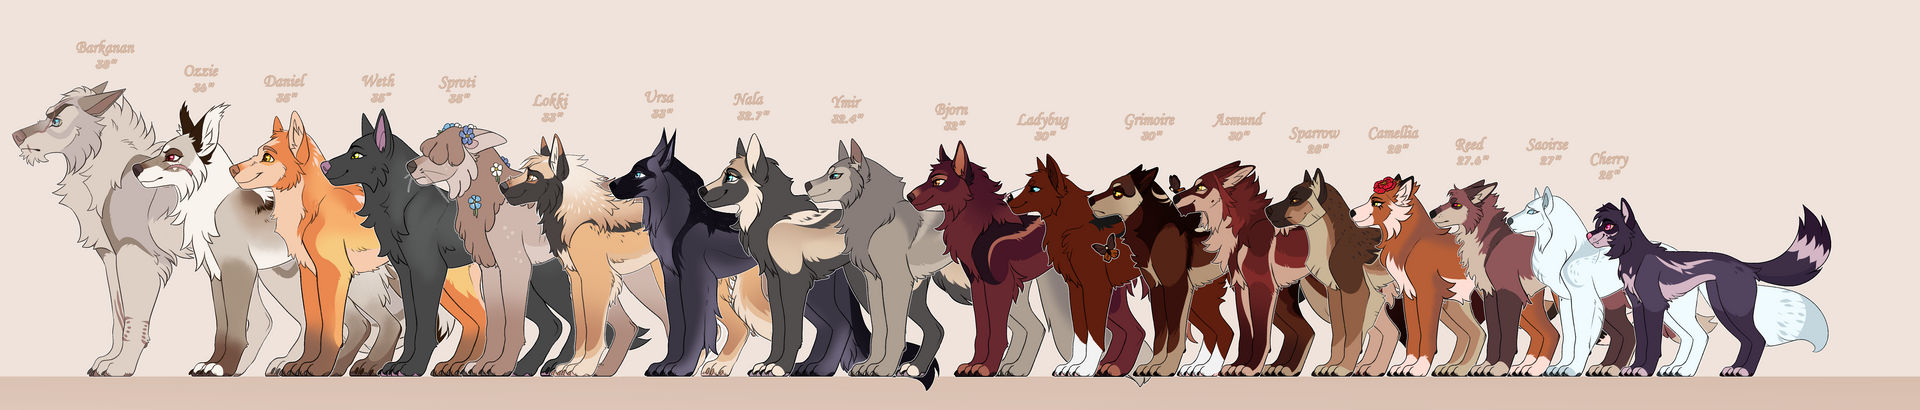 Amaryllis Tribe - Size chart by Hoccult on DeviantArt